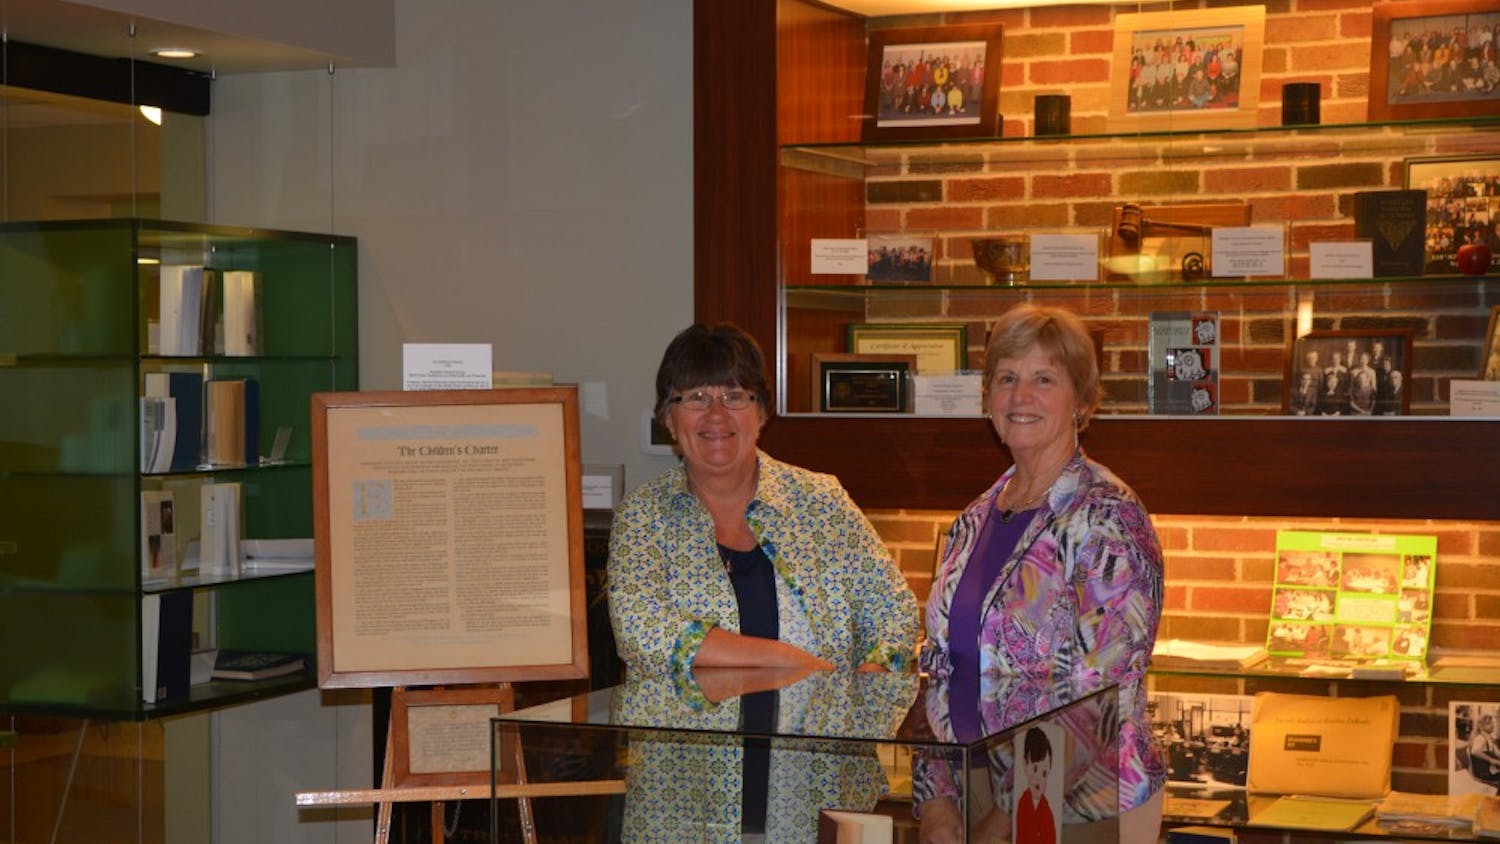 	Lynne Rocklage (left) and Nancy Halmhuber Navarre (right) standing in front of the School of Education display in the McKenny Hall Art Gallery.